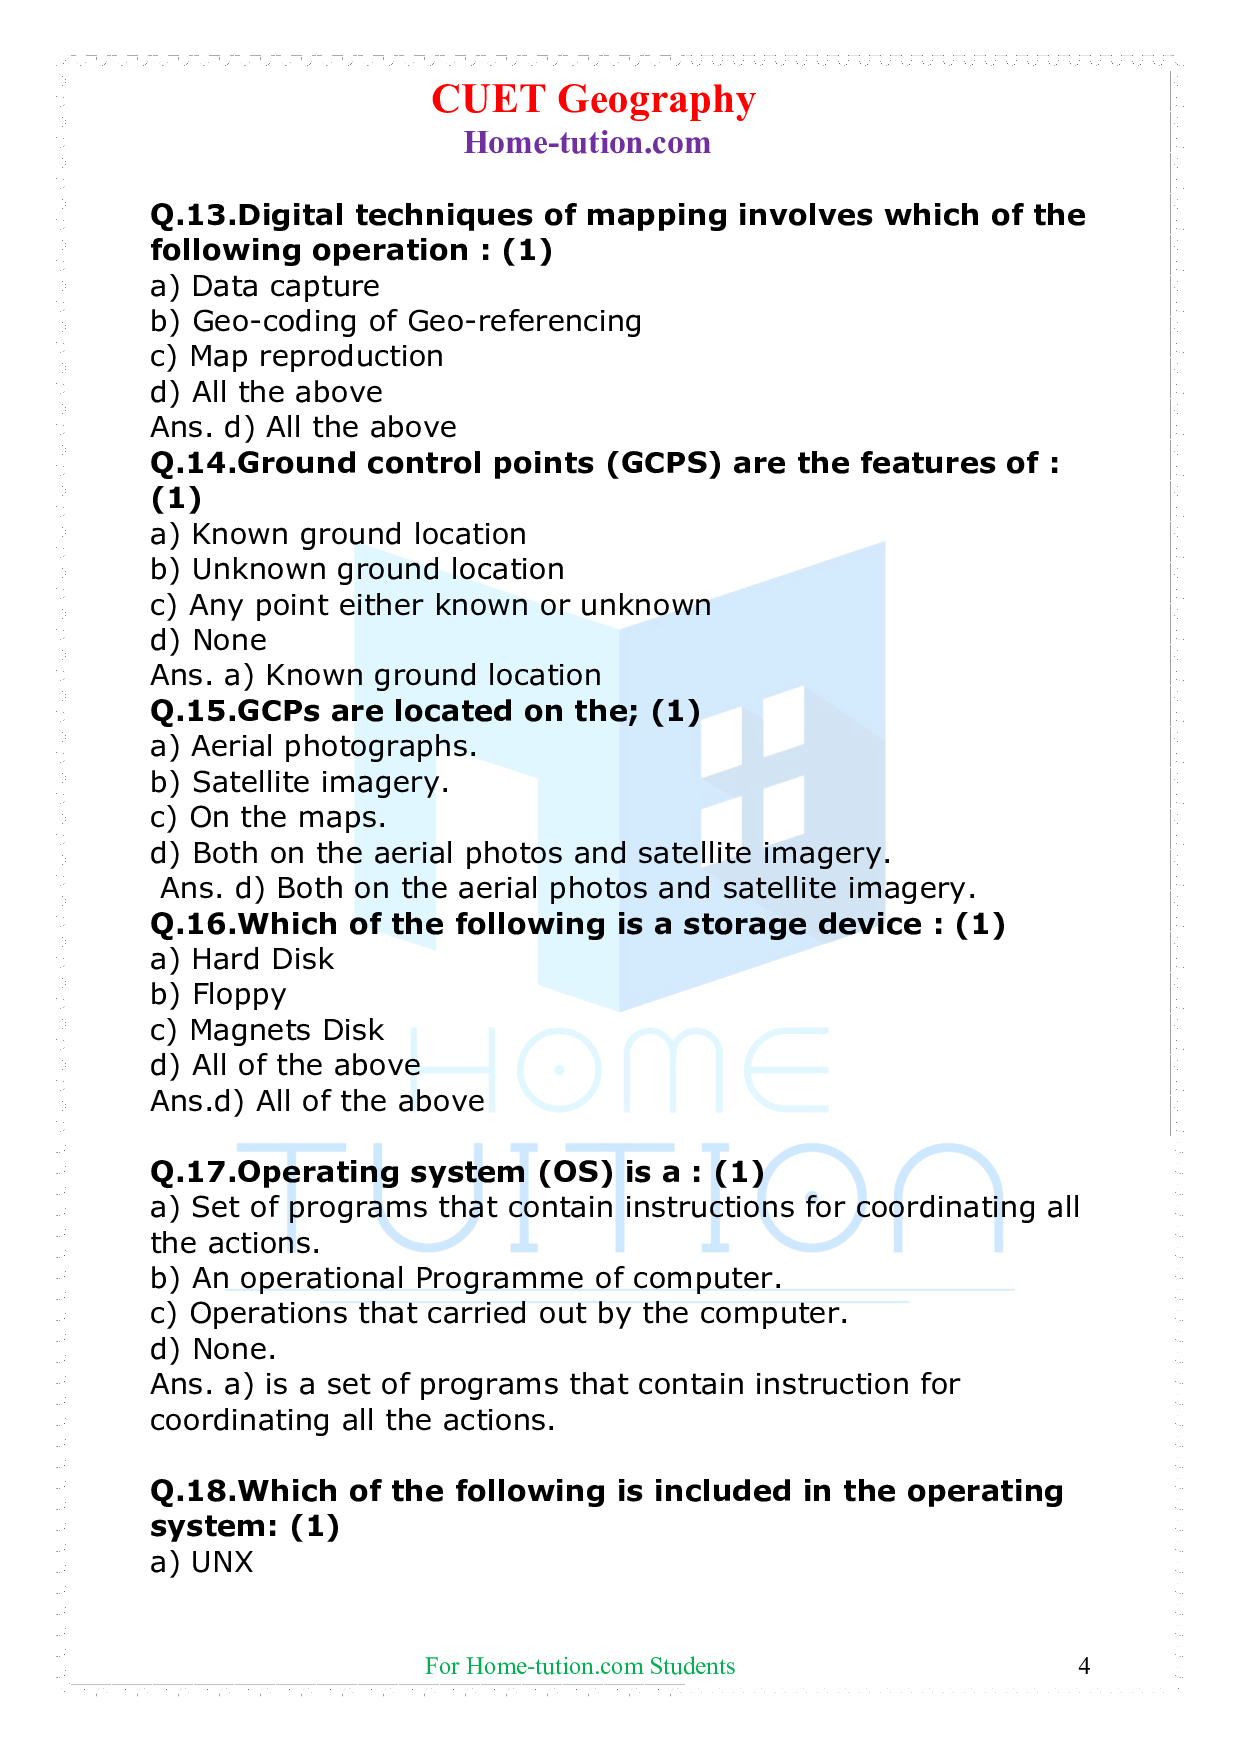 MCQ Questions For CUET Geography Chapter 4 Use of Computer in Data Processing and Mapping